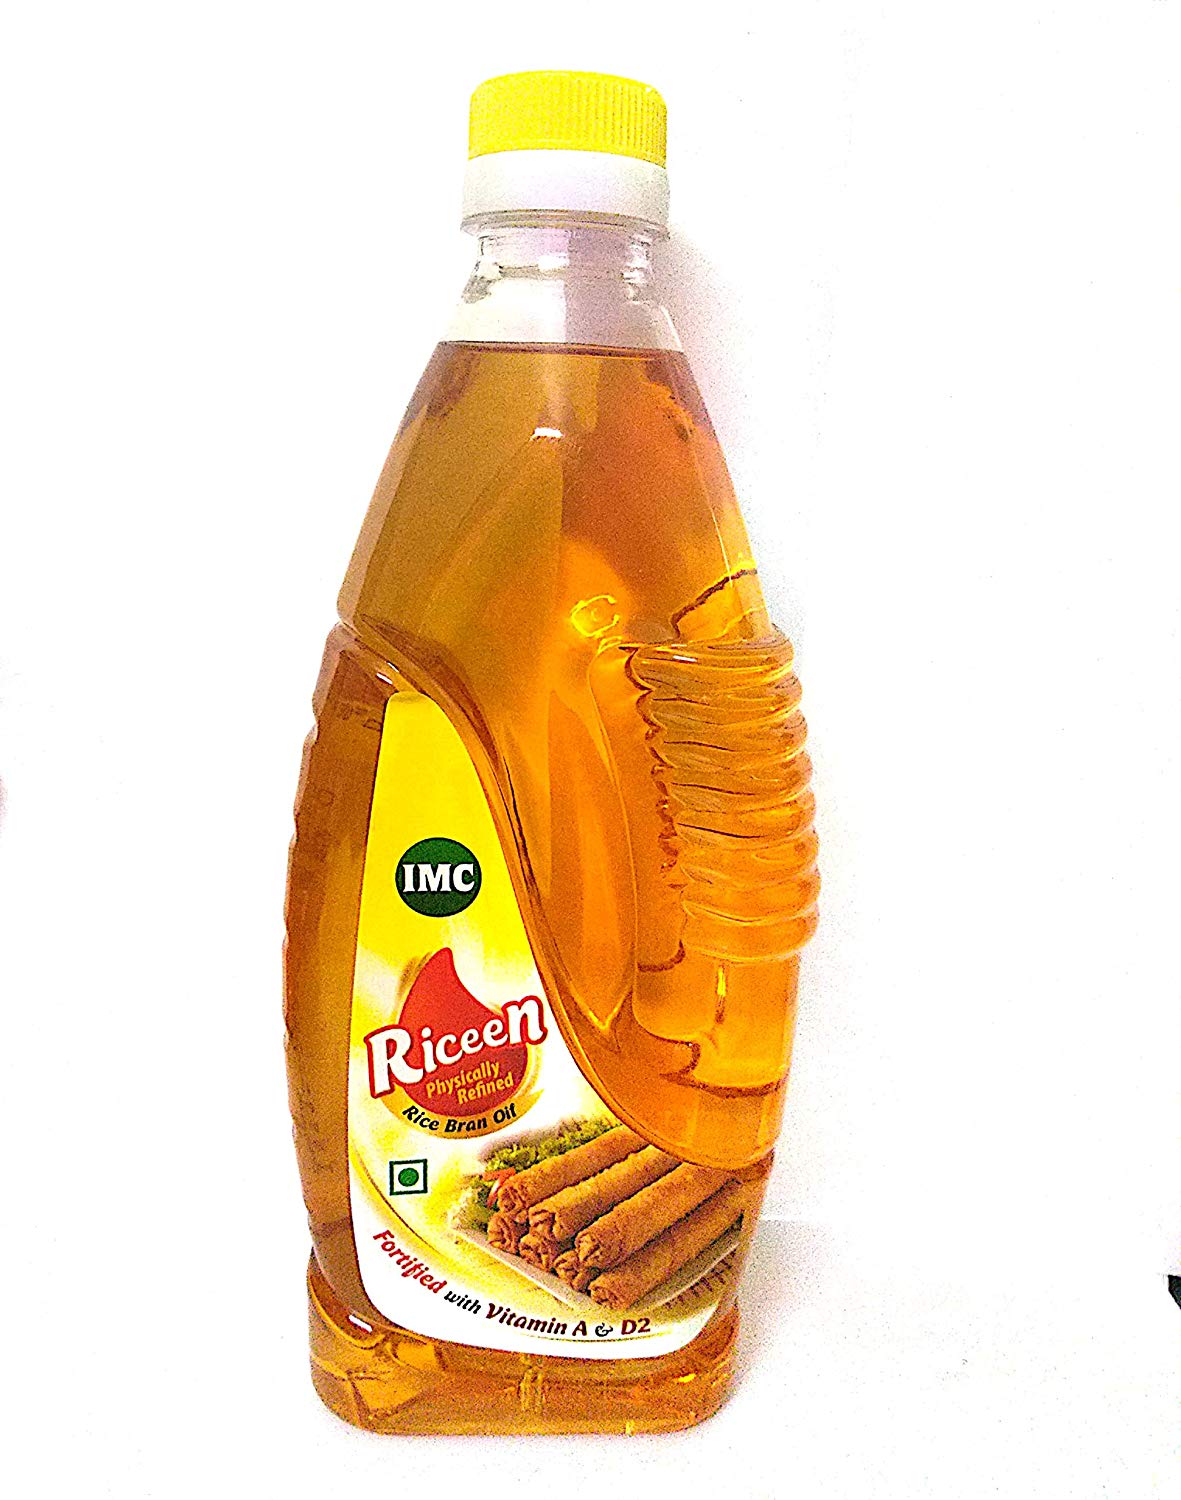 "Discover the Versatile and Nutritious Power of Rice Bran Oil: 10 Reasons to Make it a Staple in Your Kitchen!"